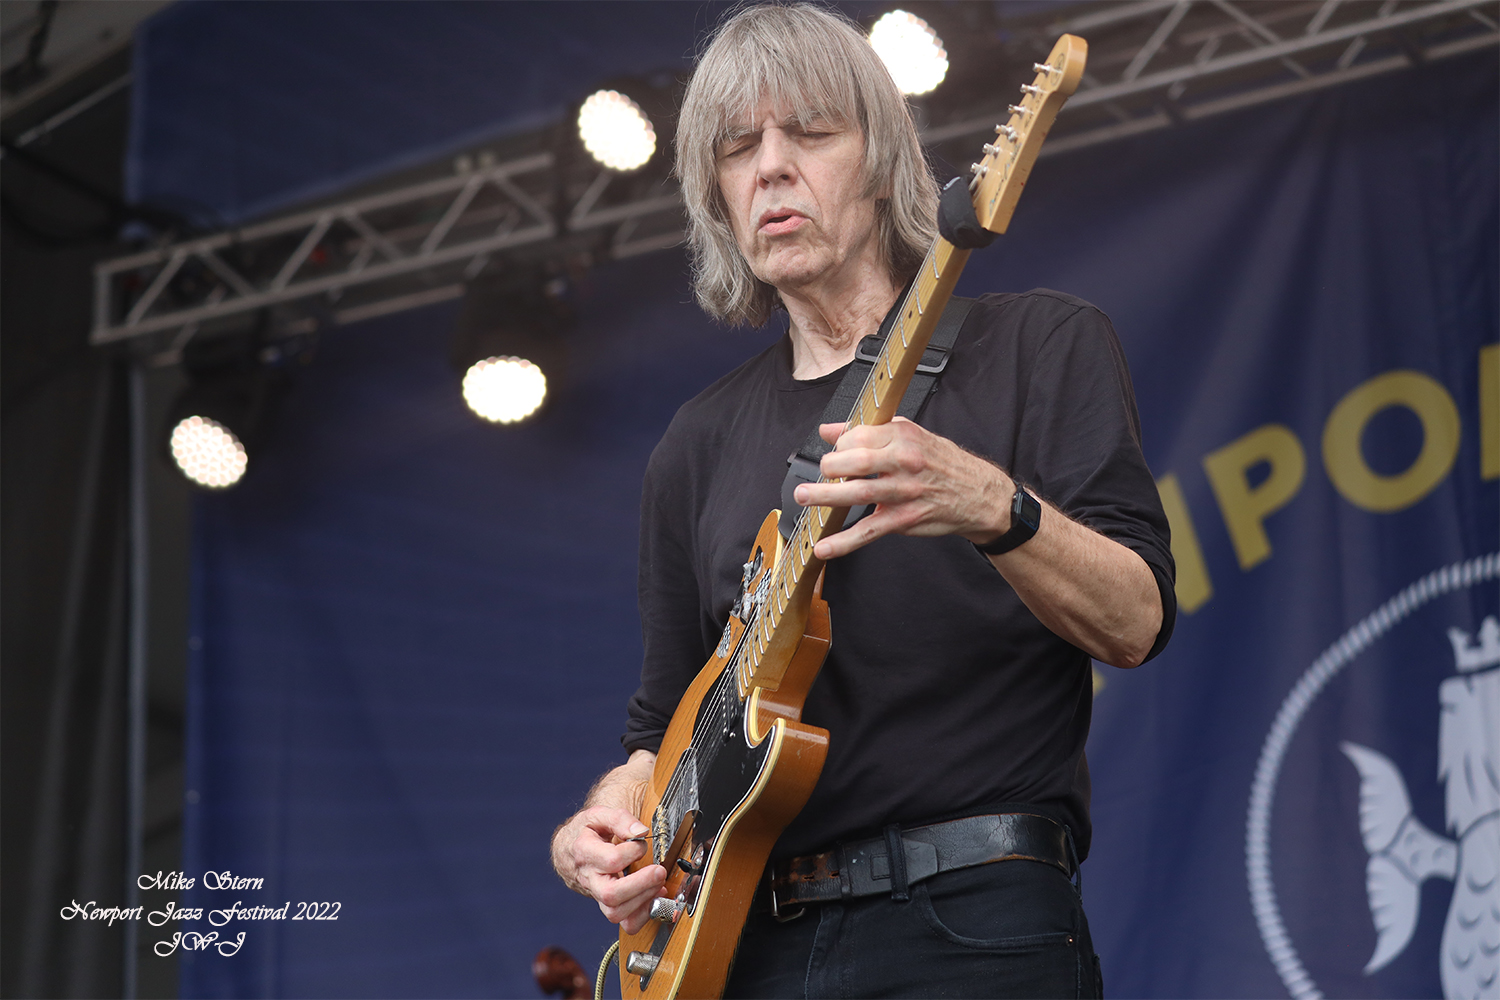 Full color shot of Mike Stern on stage at the 2022 Newport Jazz Festival in Rhode Island